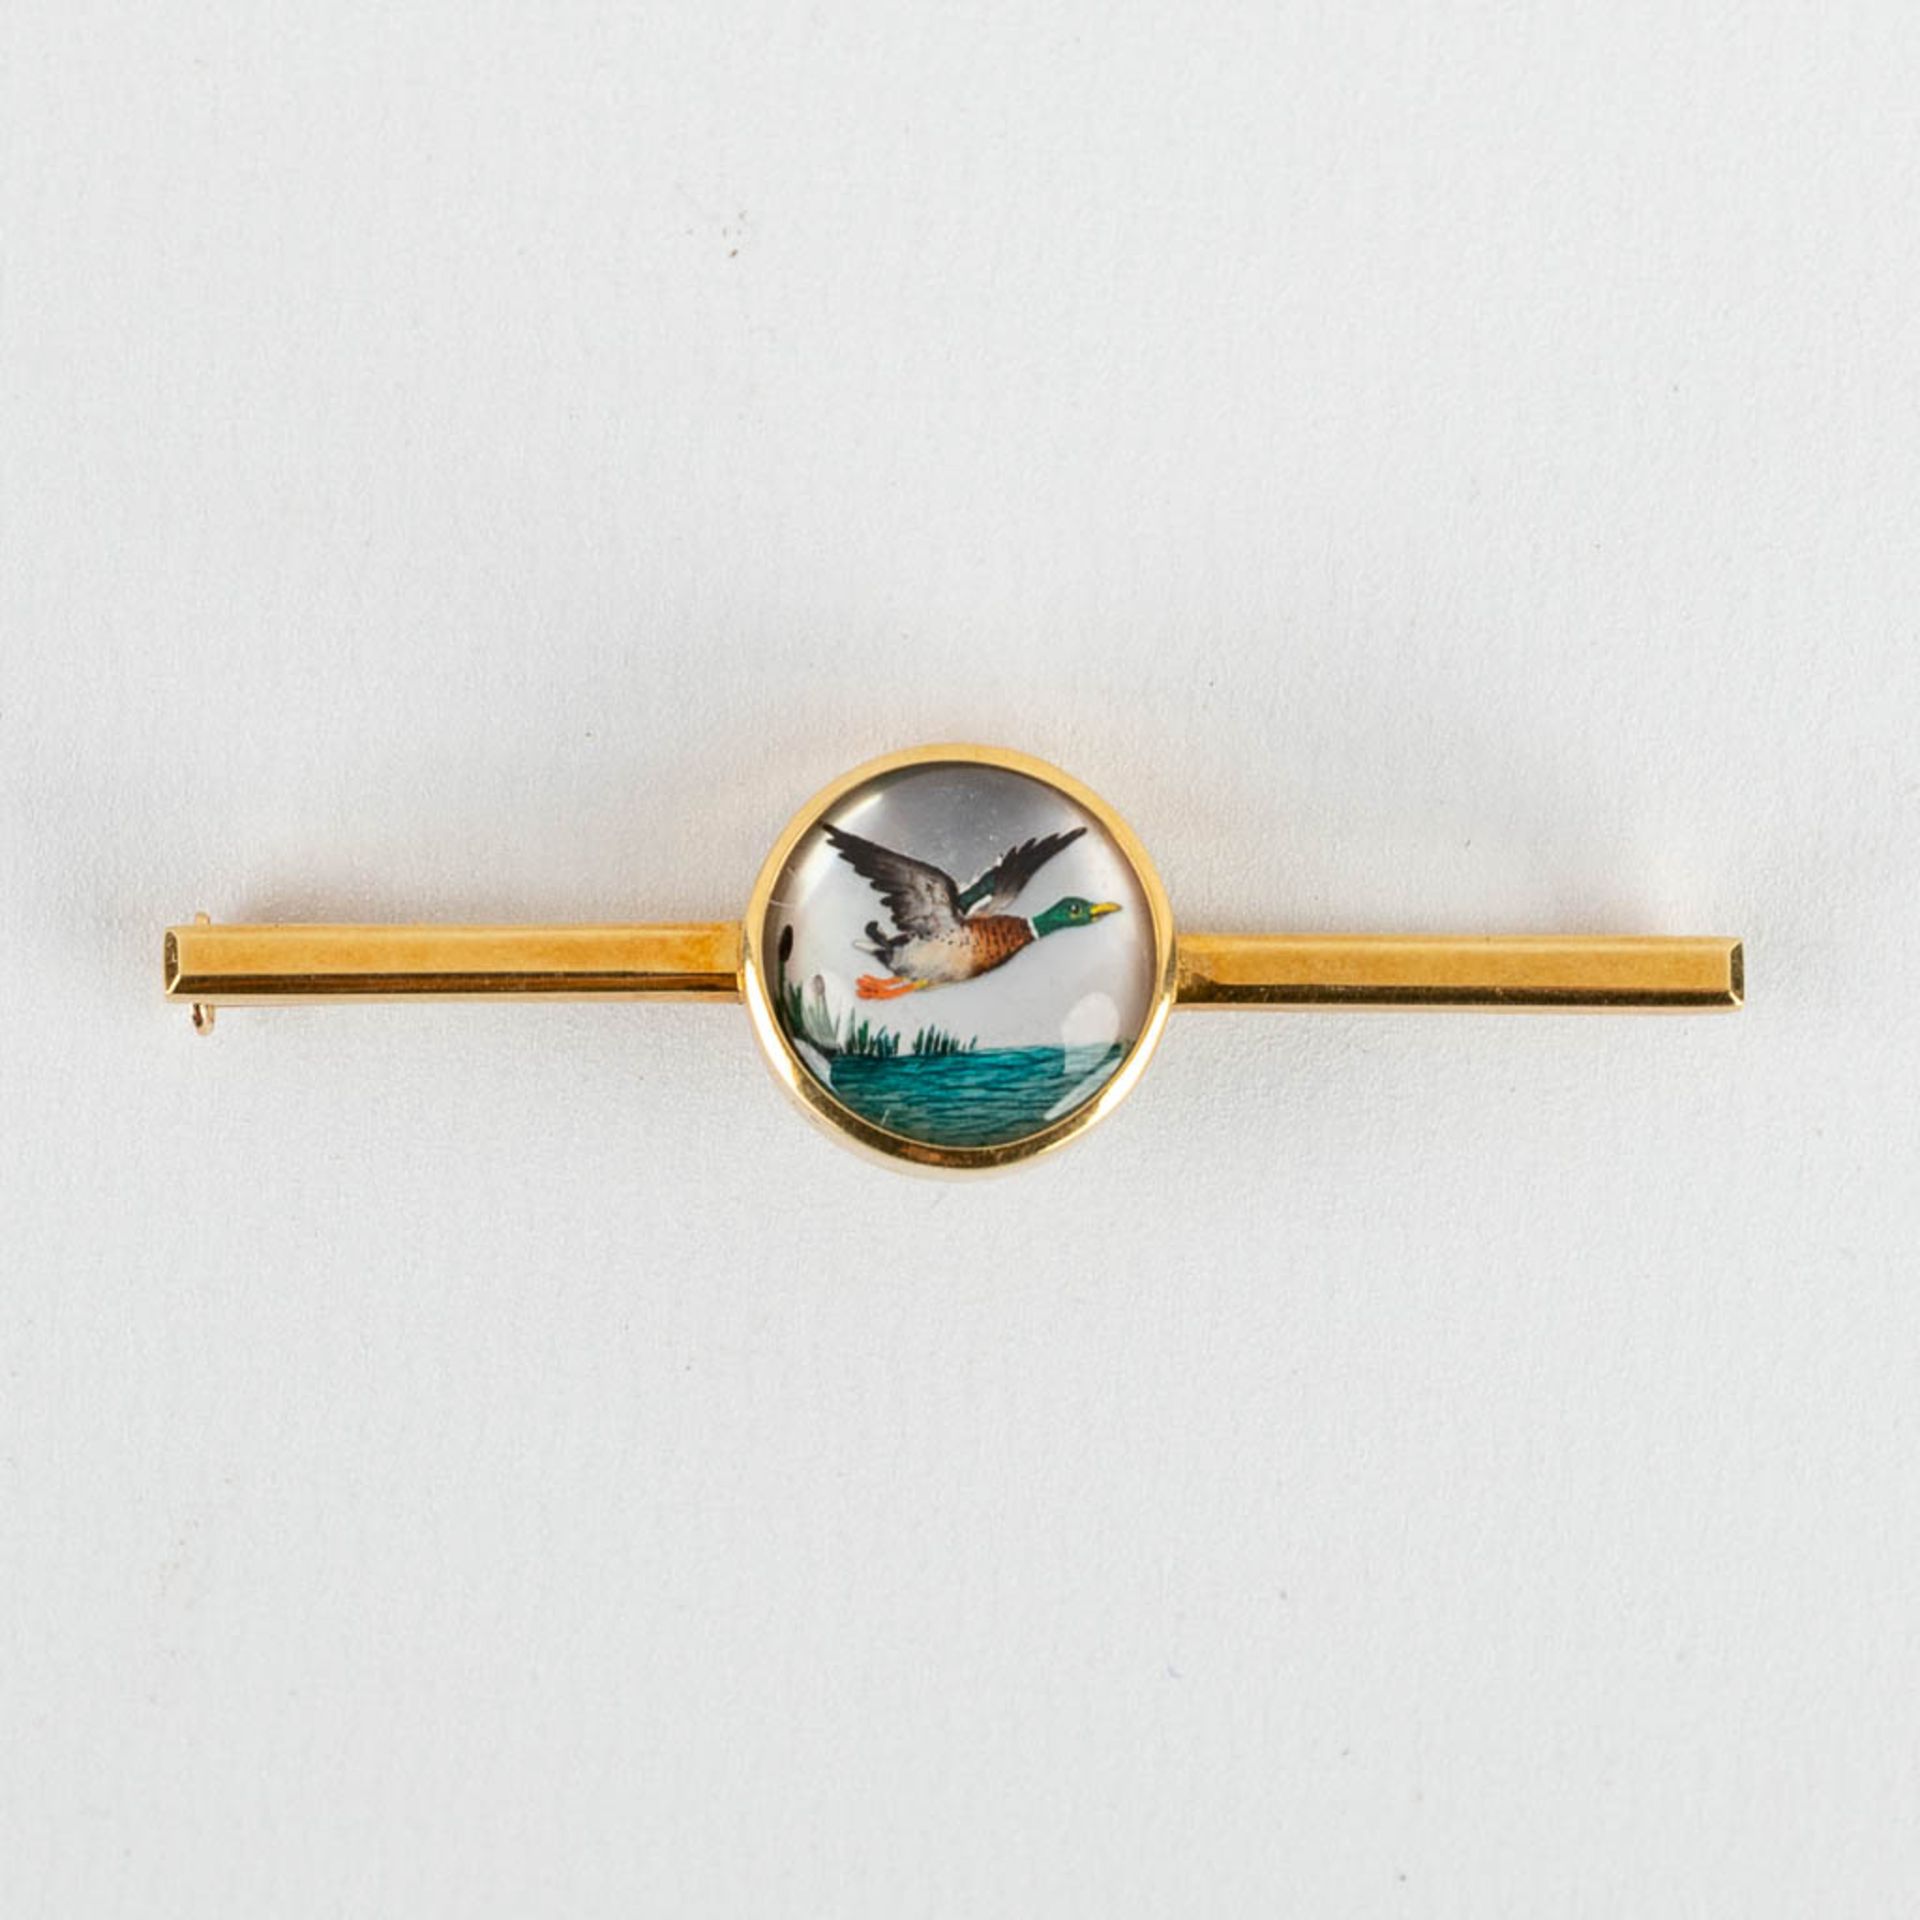 An antique brooch decorated with a miniature duck/mallard image. 18kt gold. - Image 4 of 8